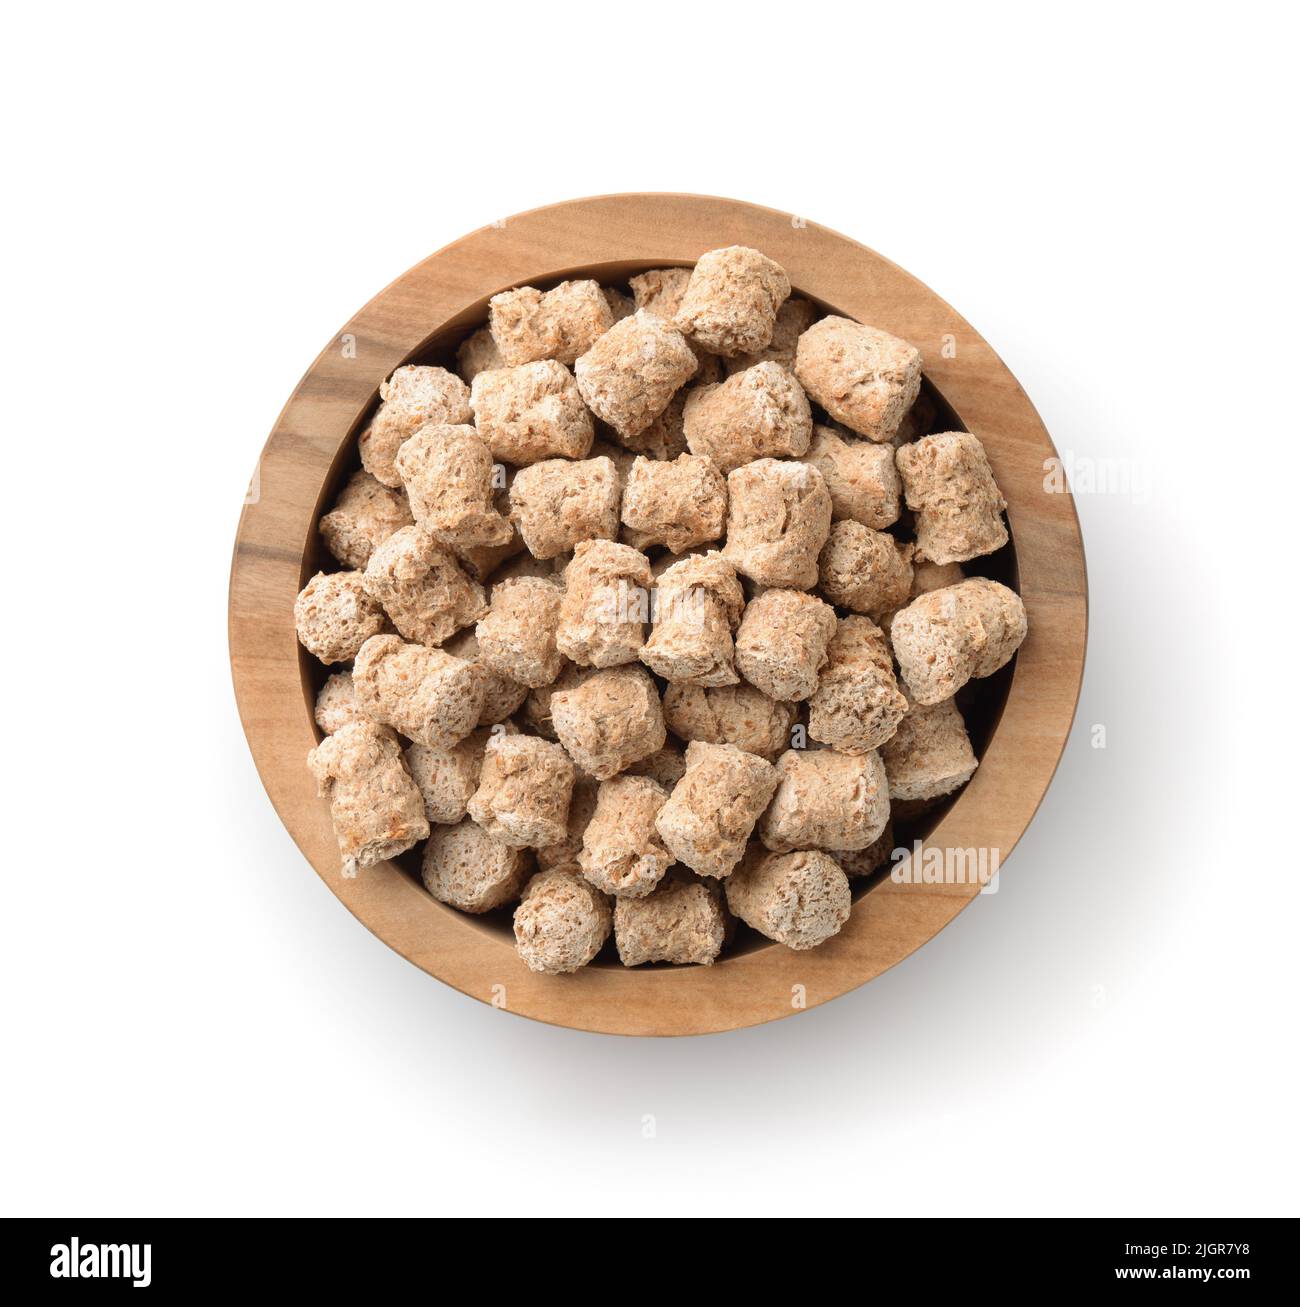 Top view of oats bran pellets in wooden bowl isolated on white Stock Photo